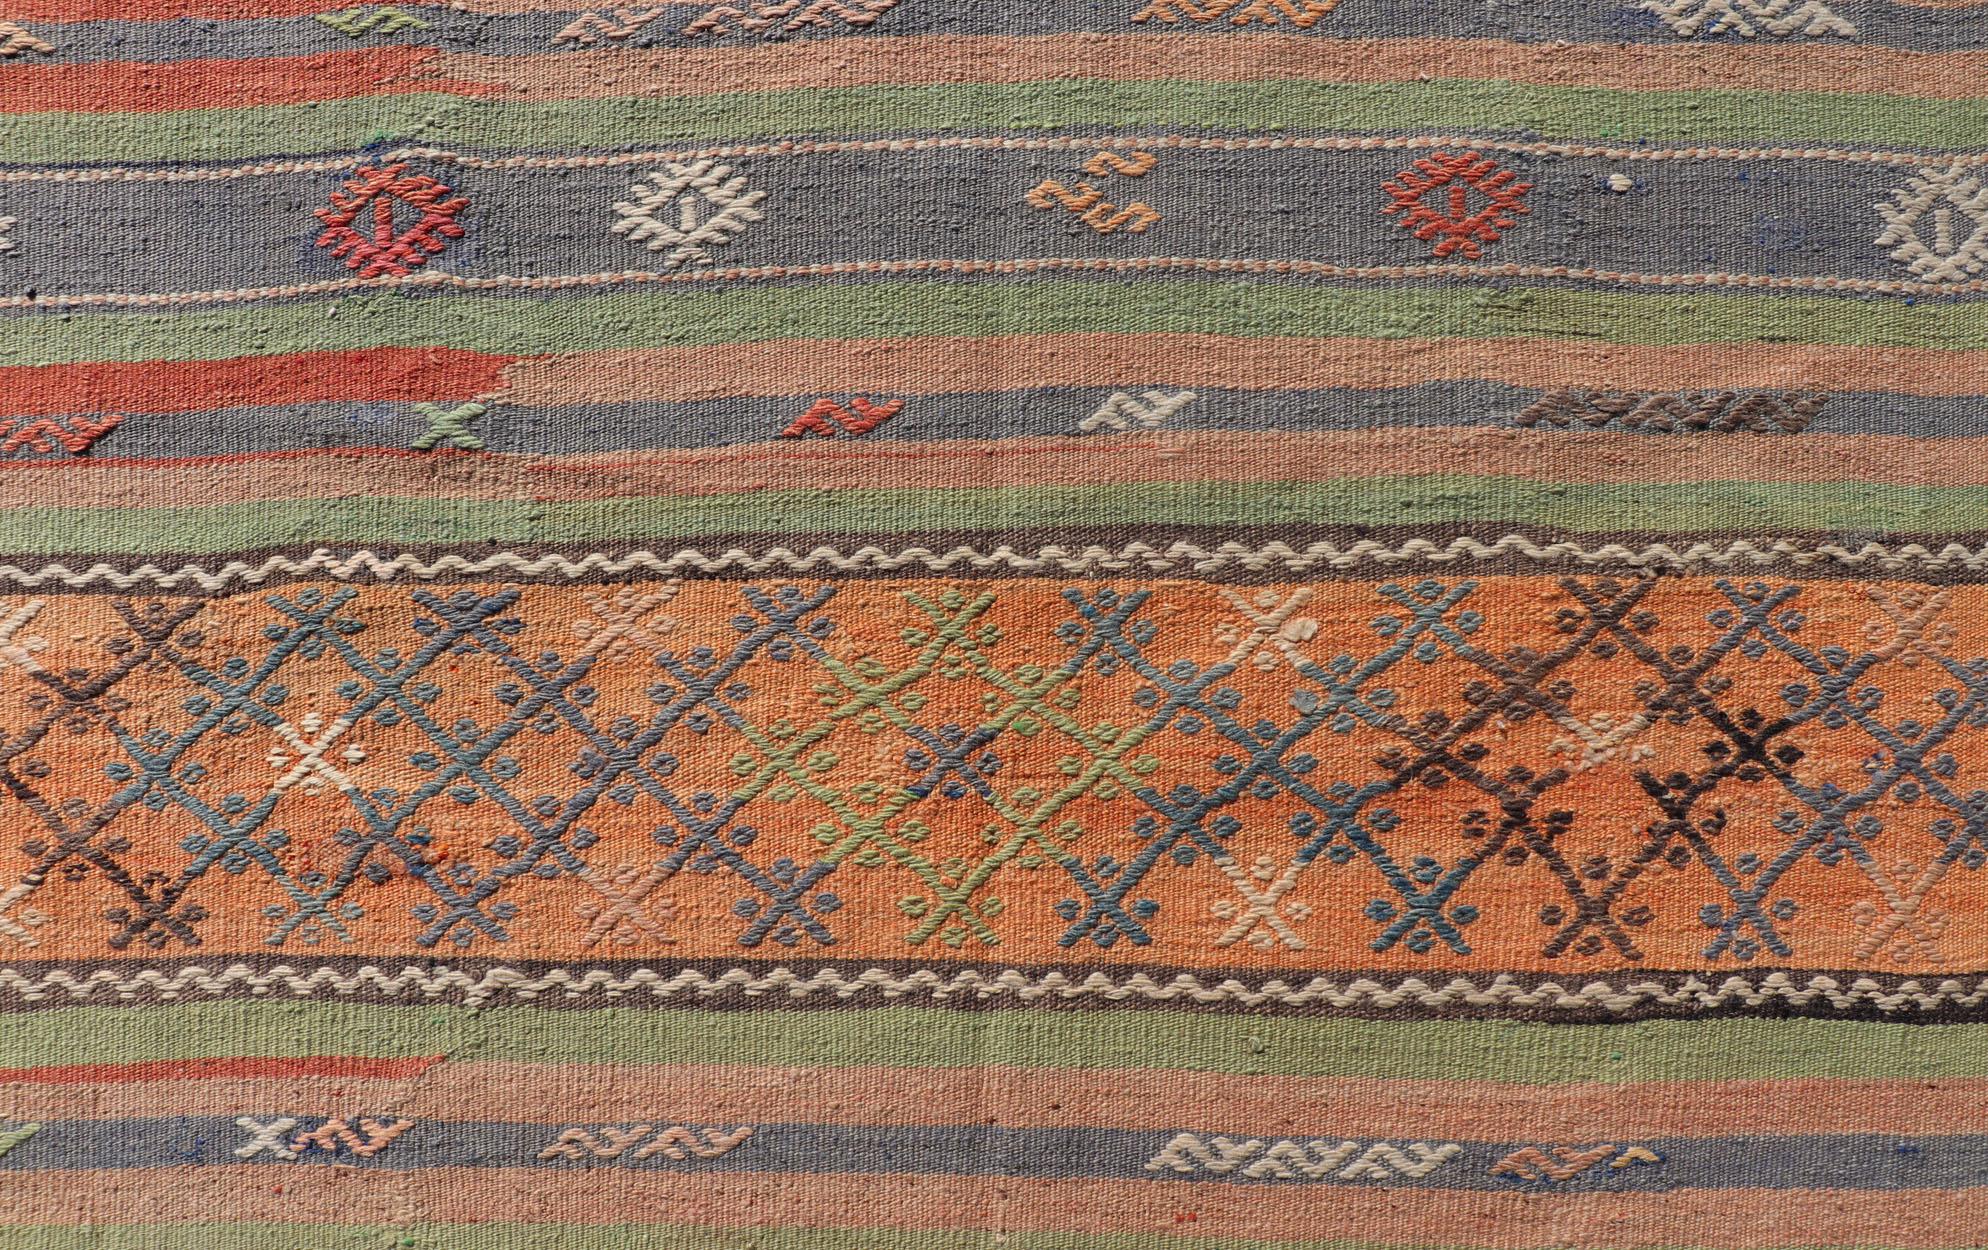 Colorful Turkish Kilim with Stripes and Geometric Elements in Orange and Green For Sale 4